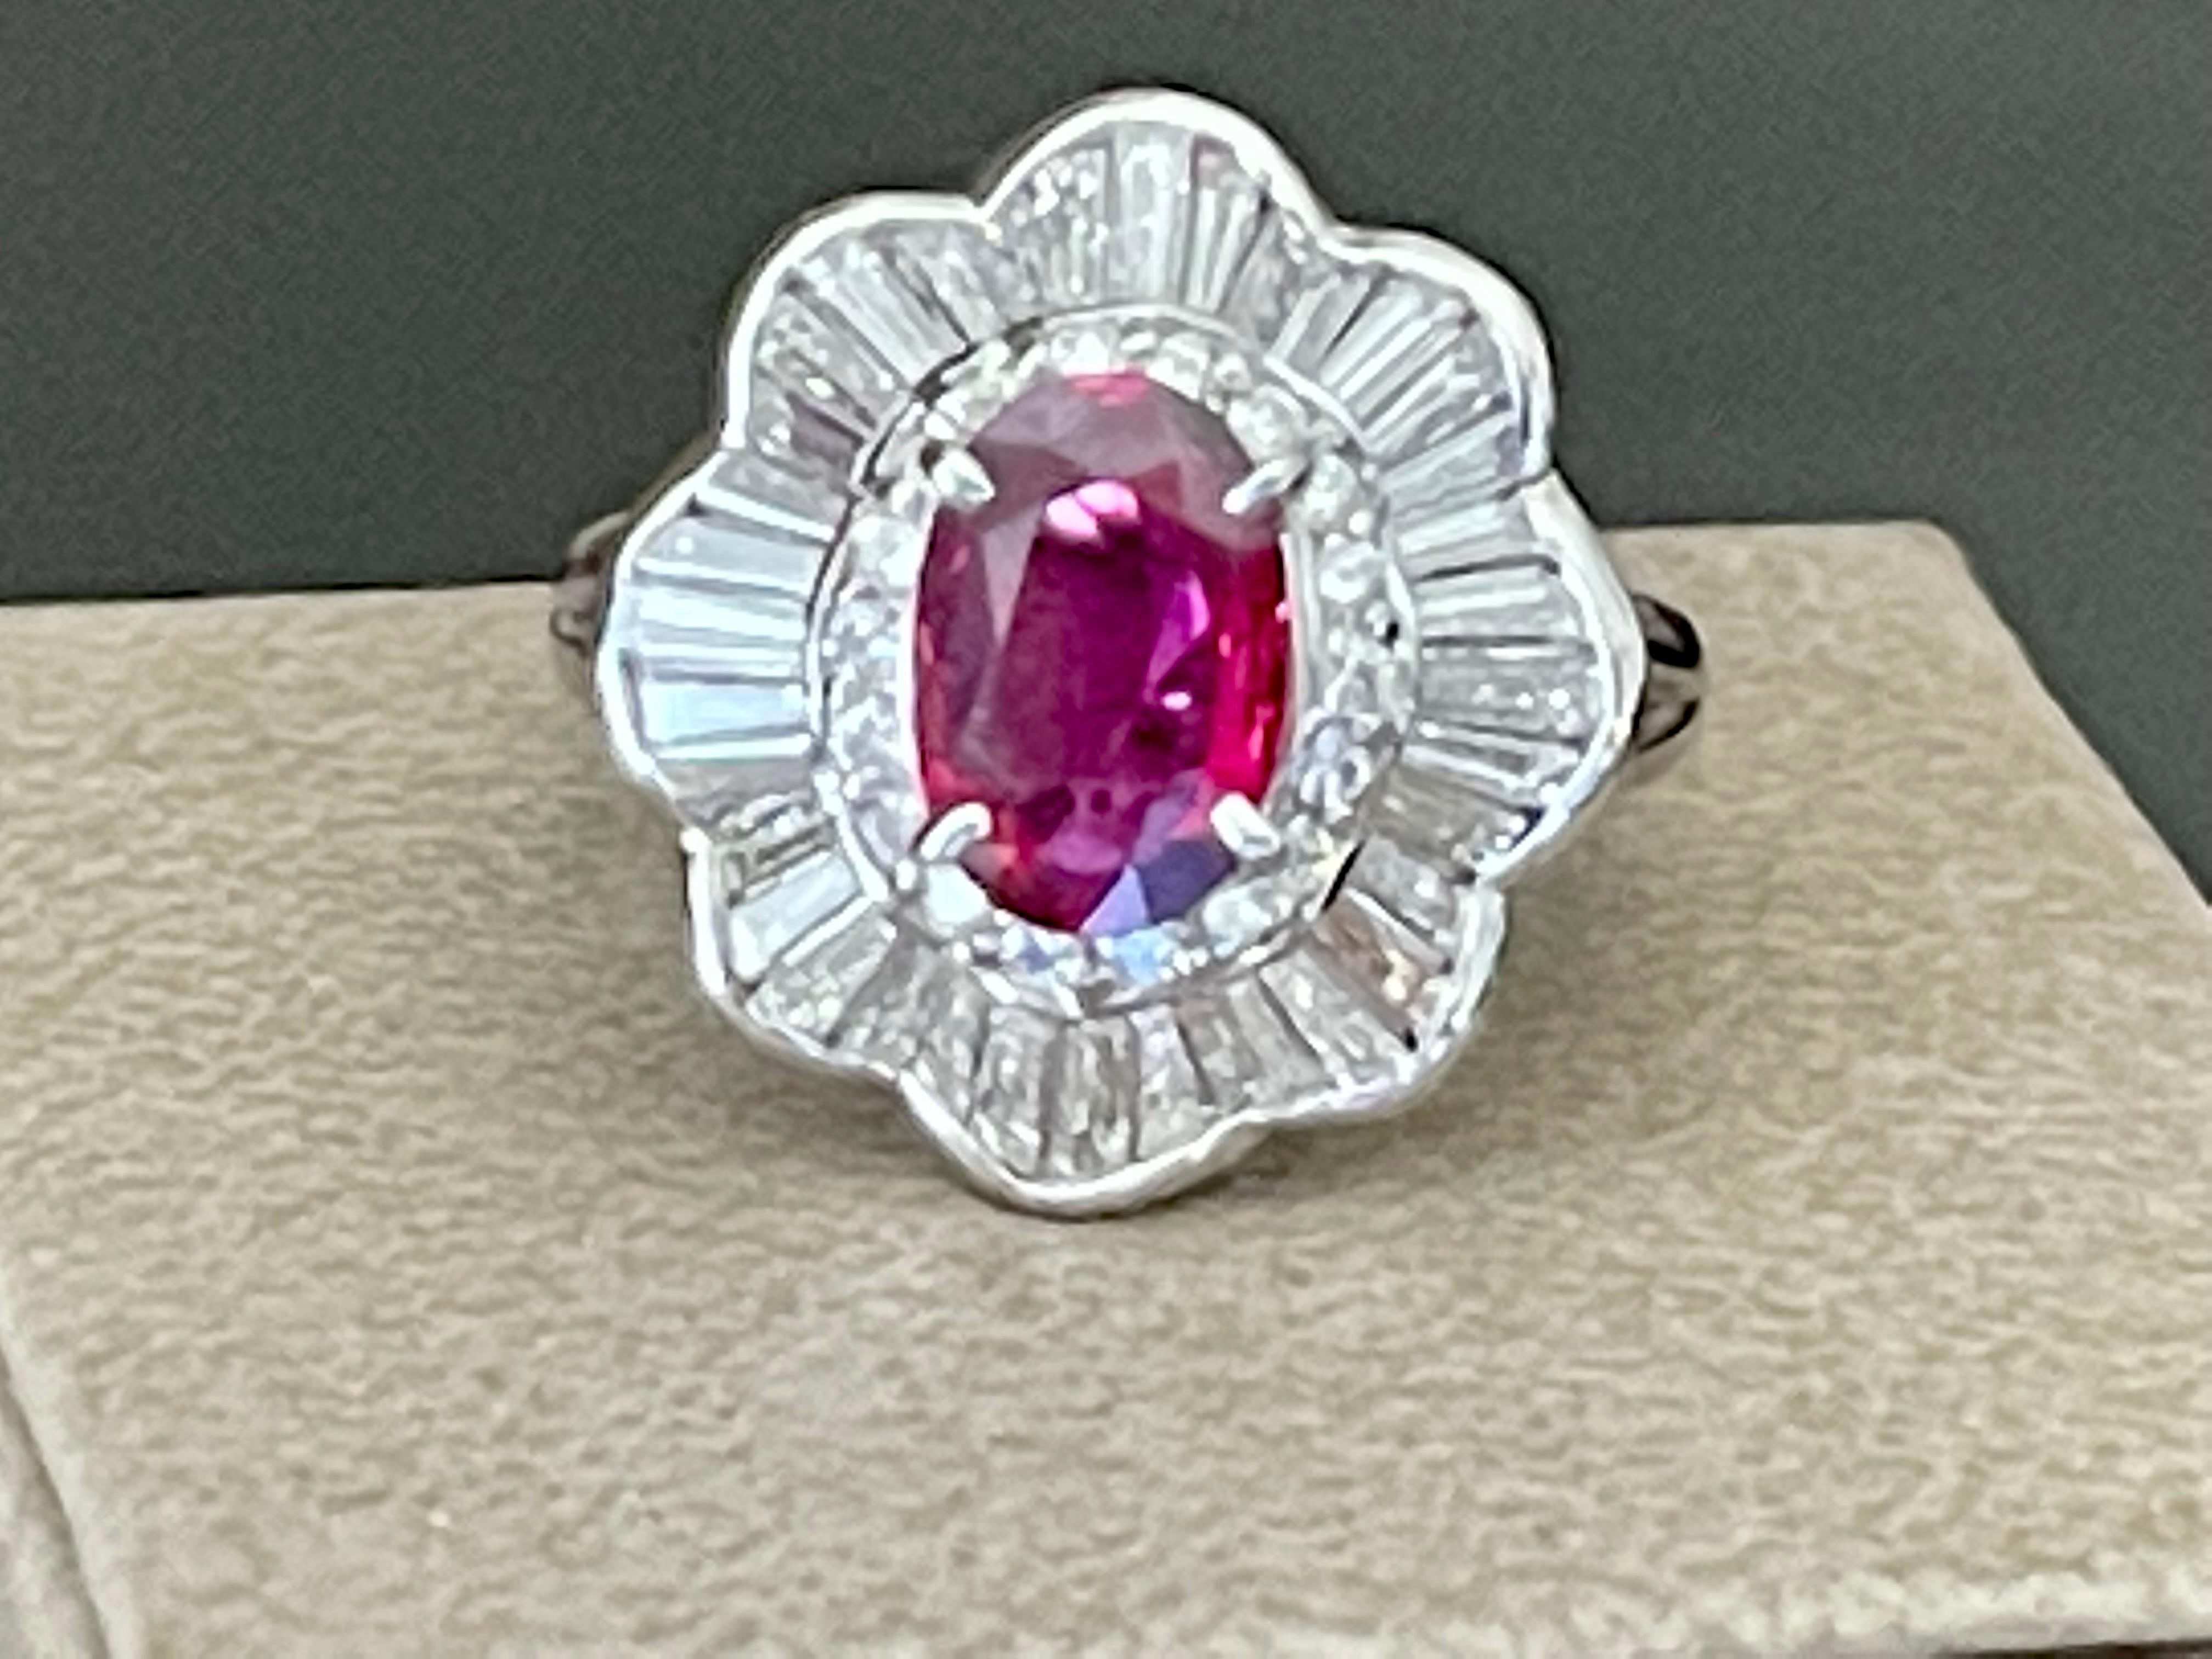 Timeless Platinum 850 Entourage Ring with an oval claw set Ruby weighing approximately 1.18 ct surrounded by tapered Baguette Diamonds and brilliant cut Diamond with an estimate weight of 1.23 ct , G color vs2 clarity.
The ring is currently size